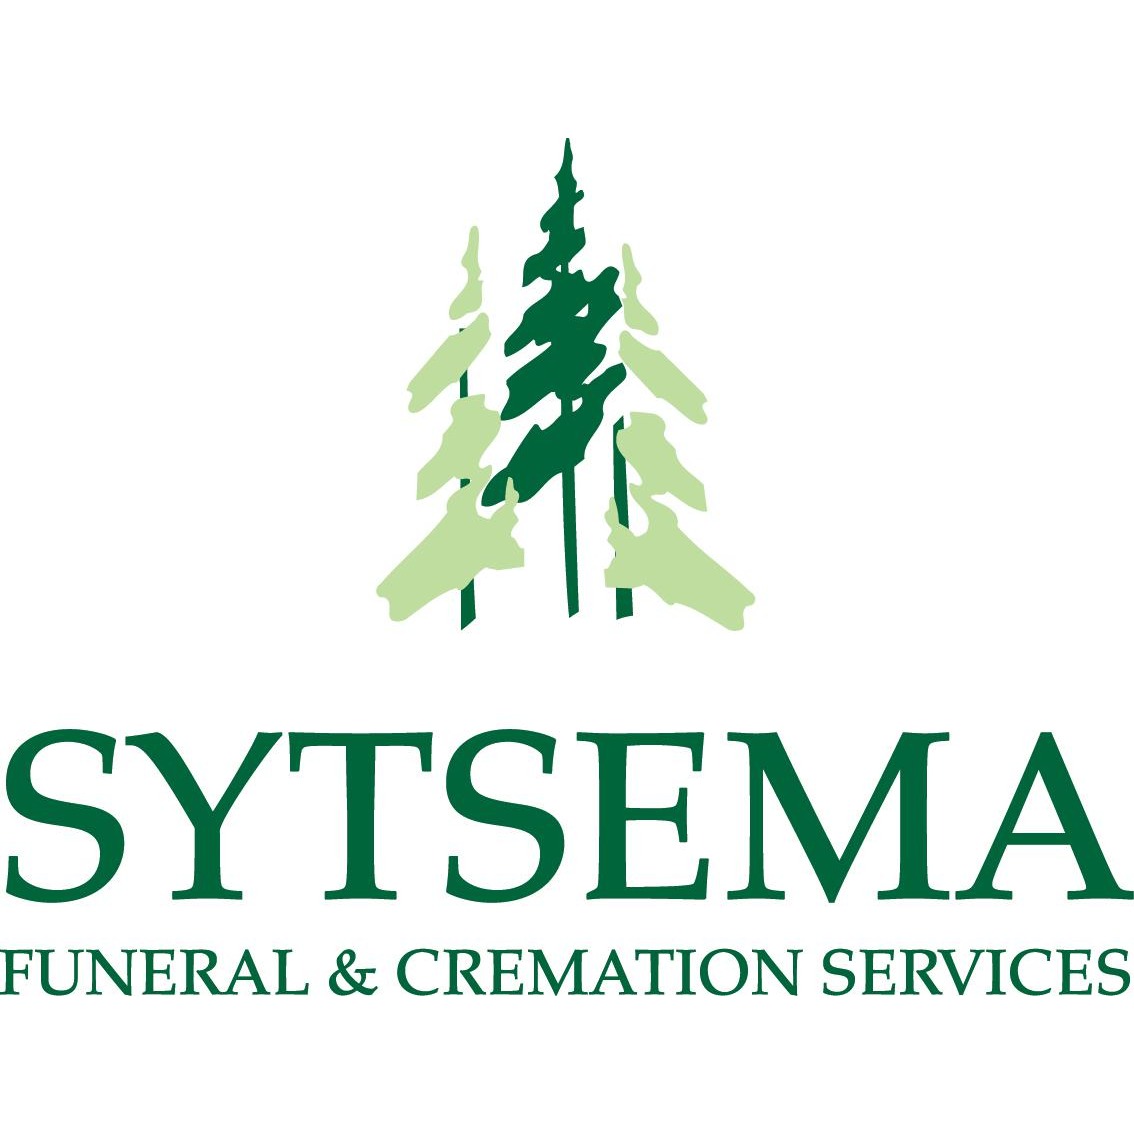 The Walburn Chapel of Sytsema Funeral & Cremation Services Logo